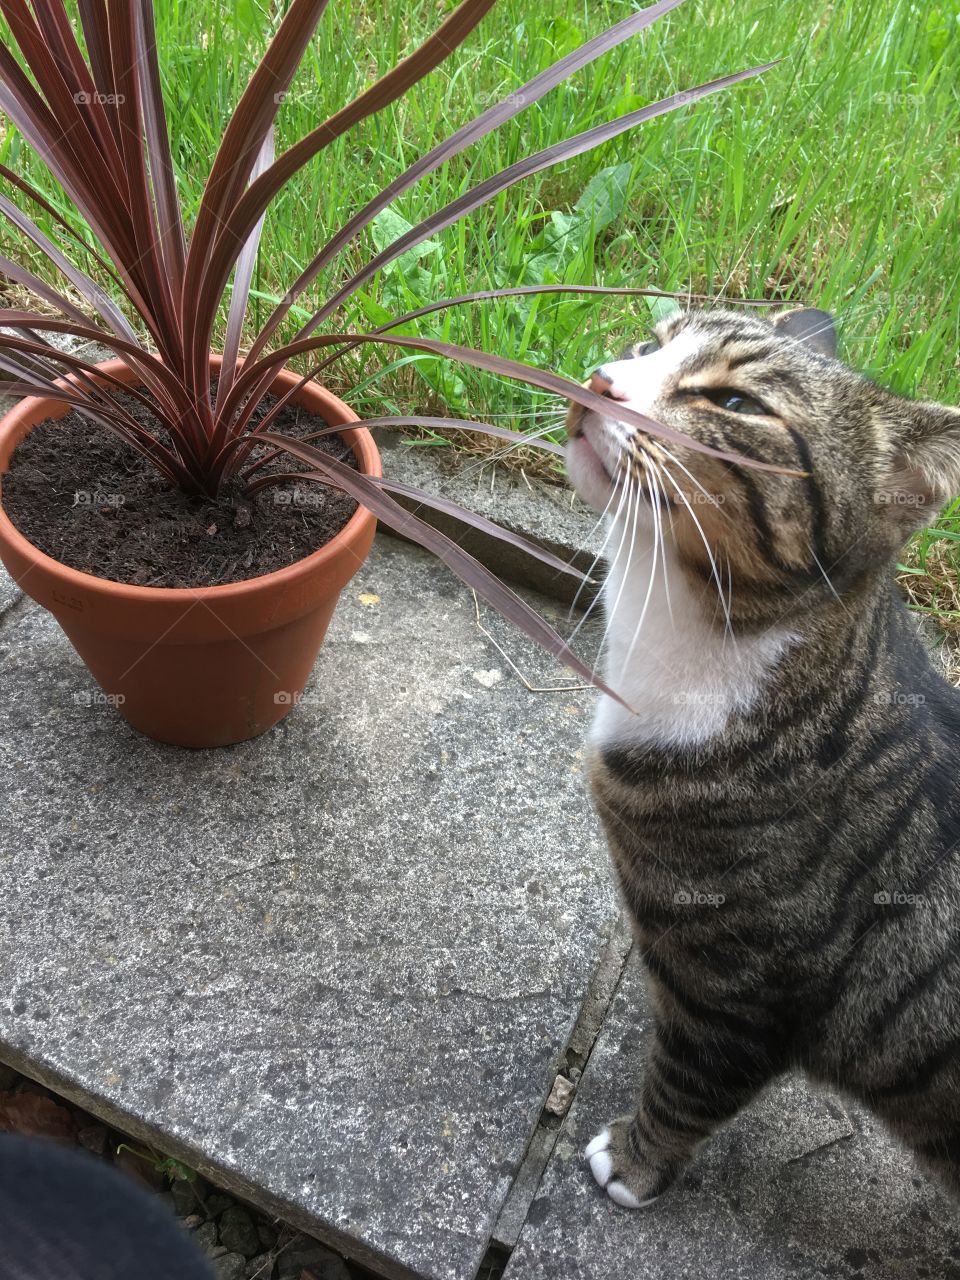 My cat loves the pretty new plants 😽